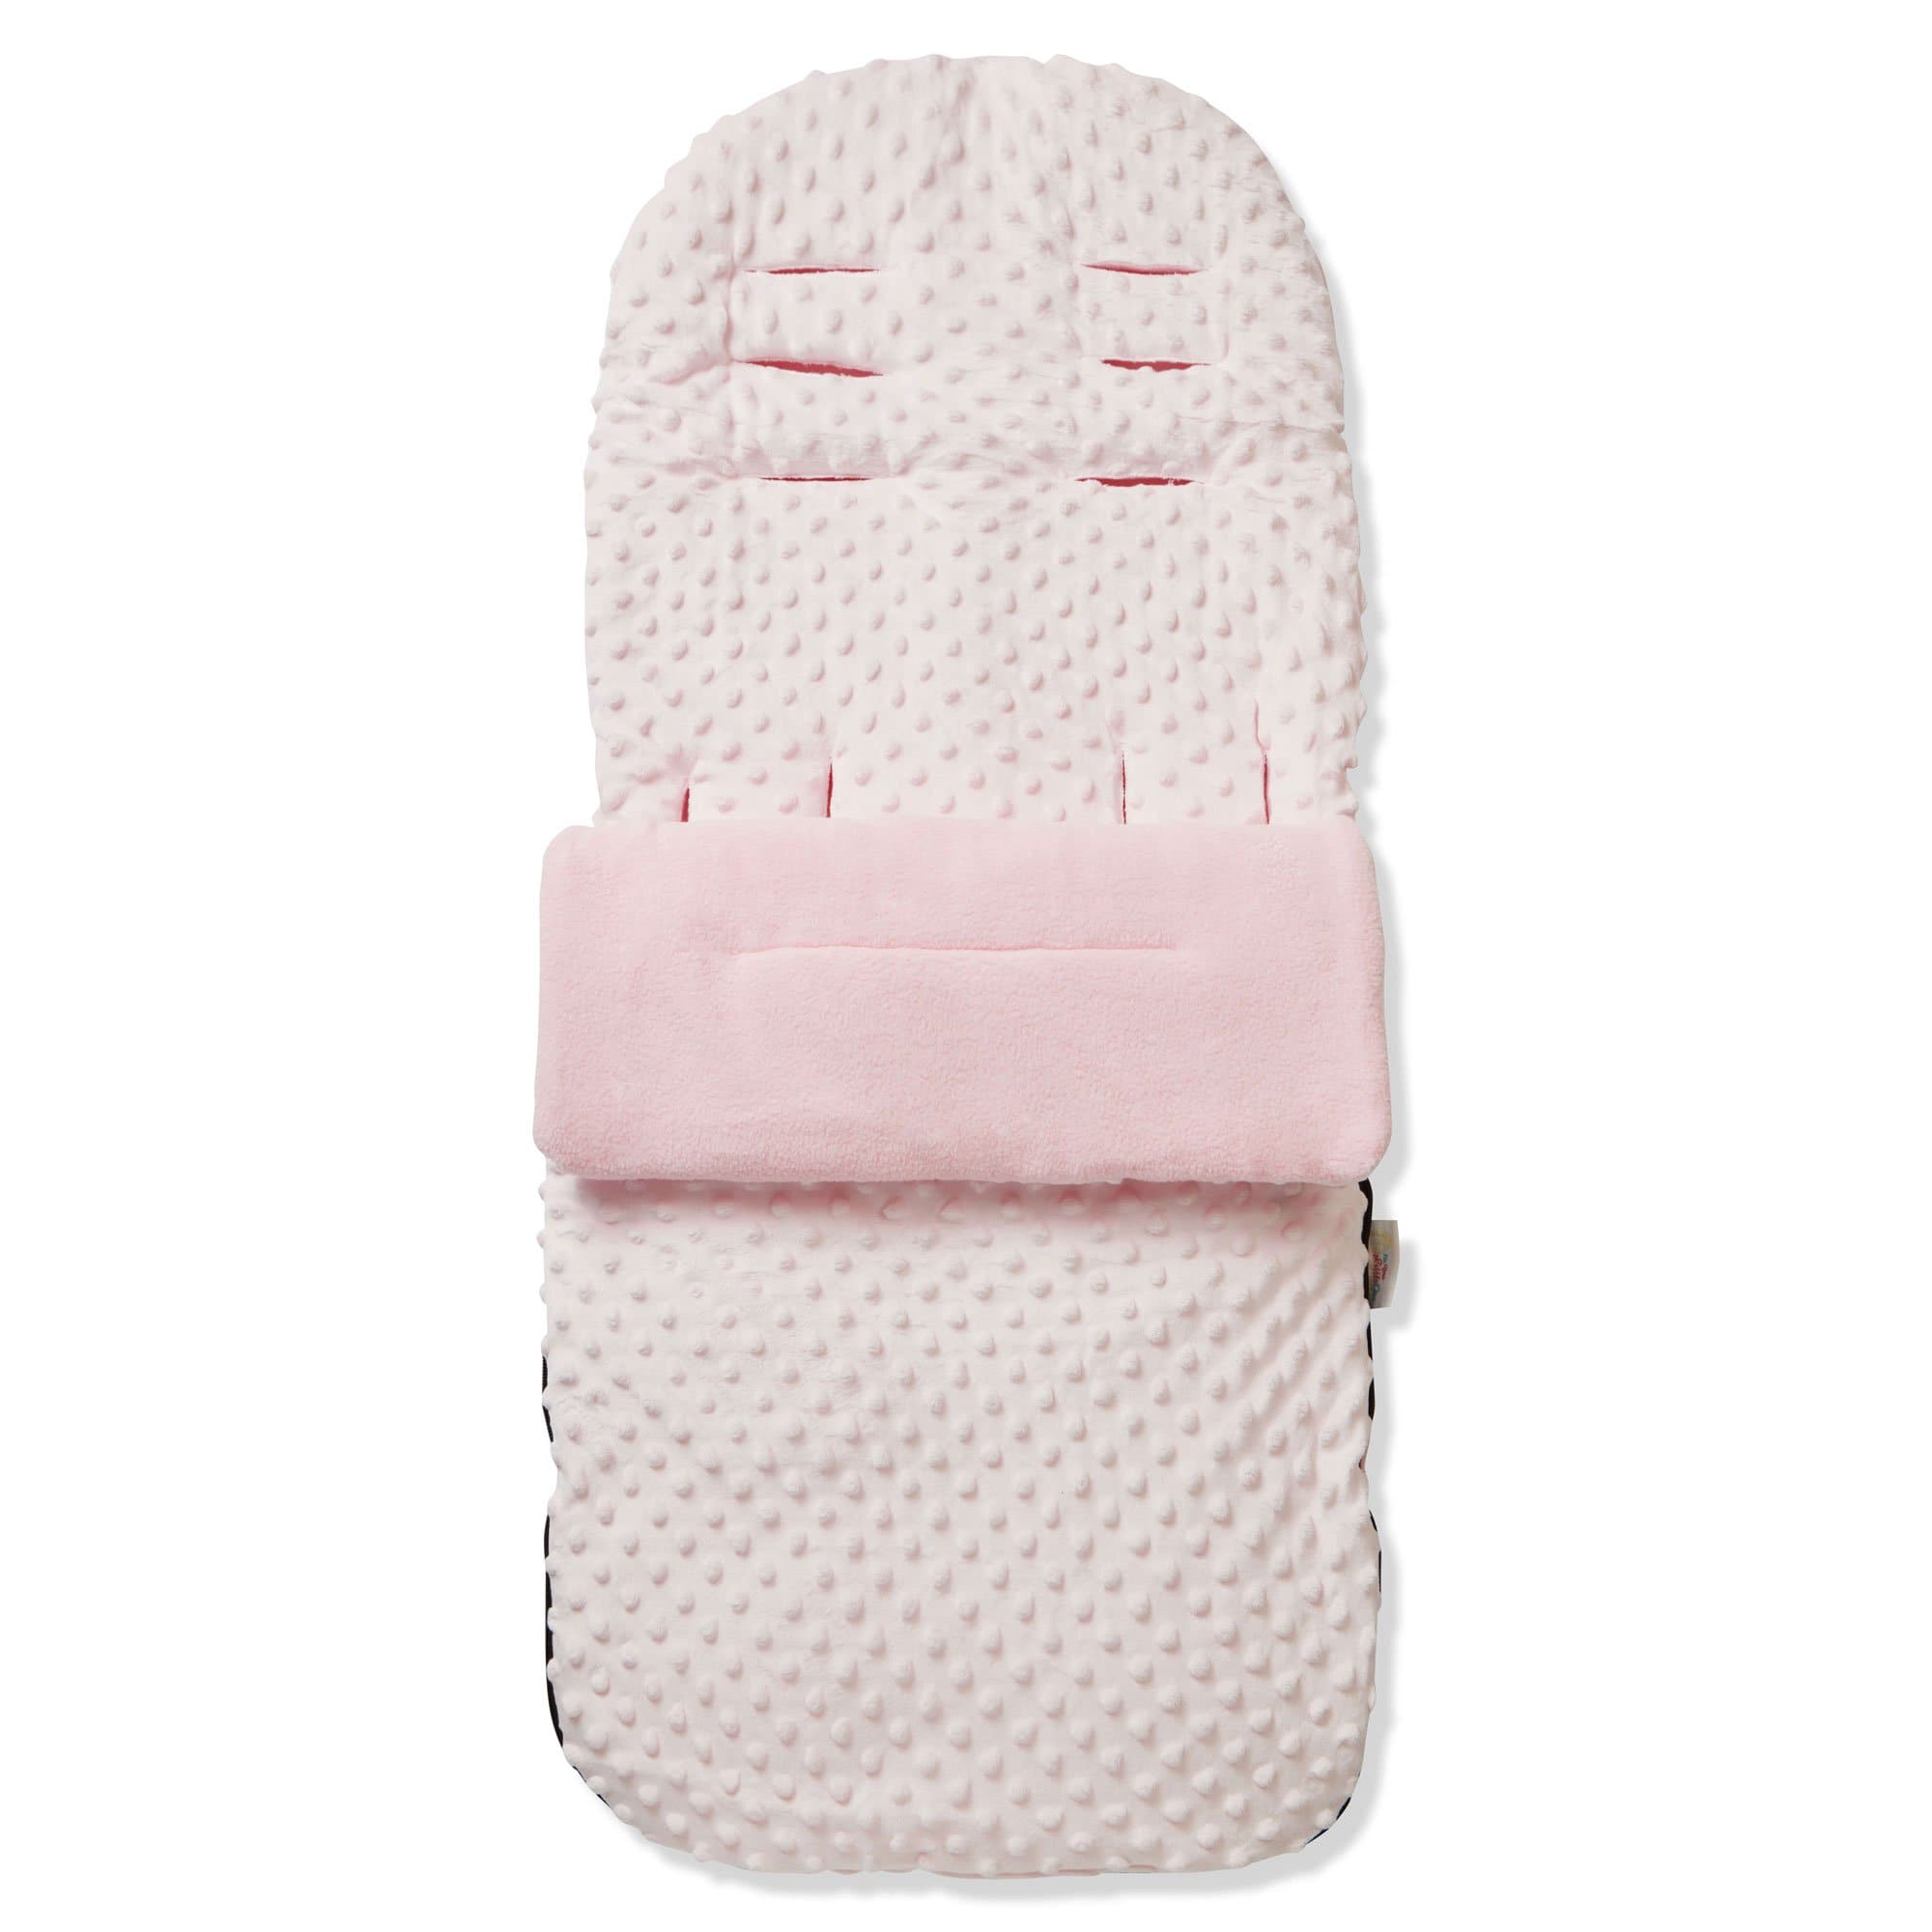 Dimple Footmuff / Cosy Toes Compatible with Brevi - For Your Little One